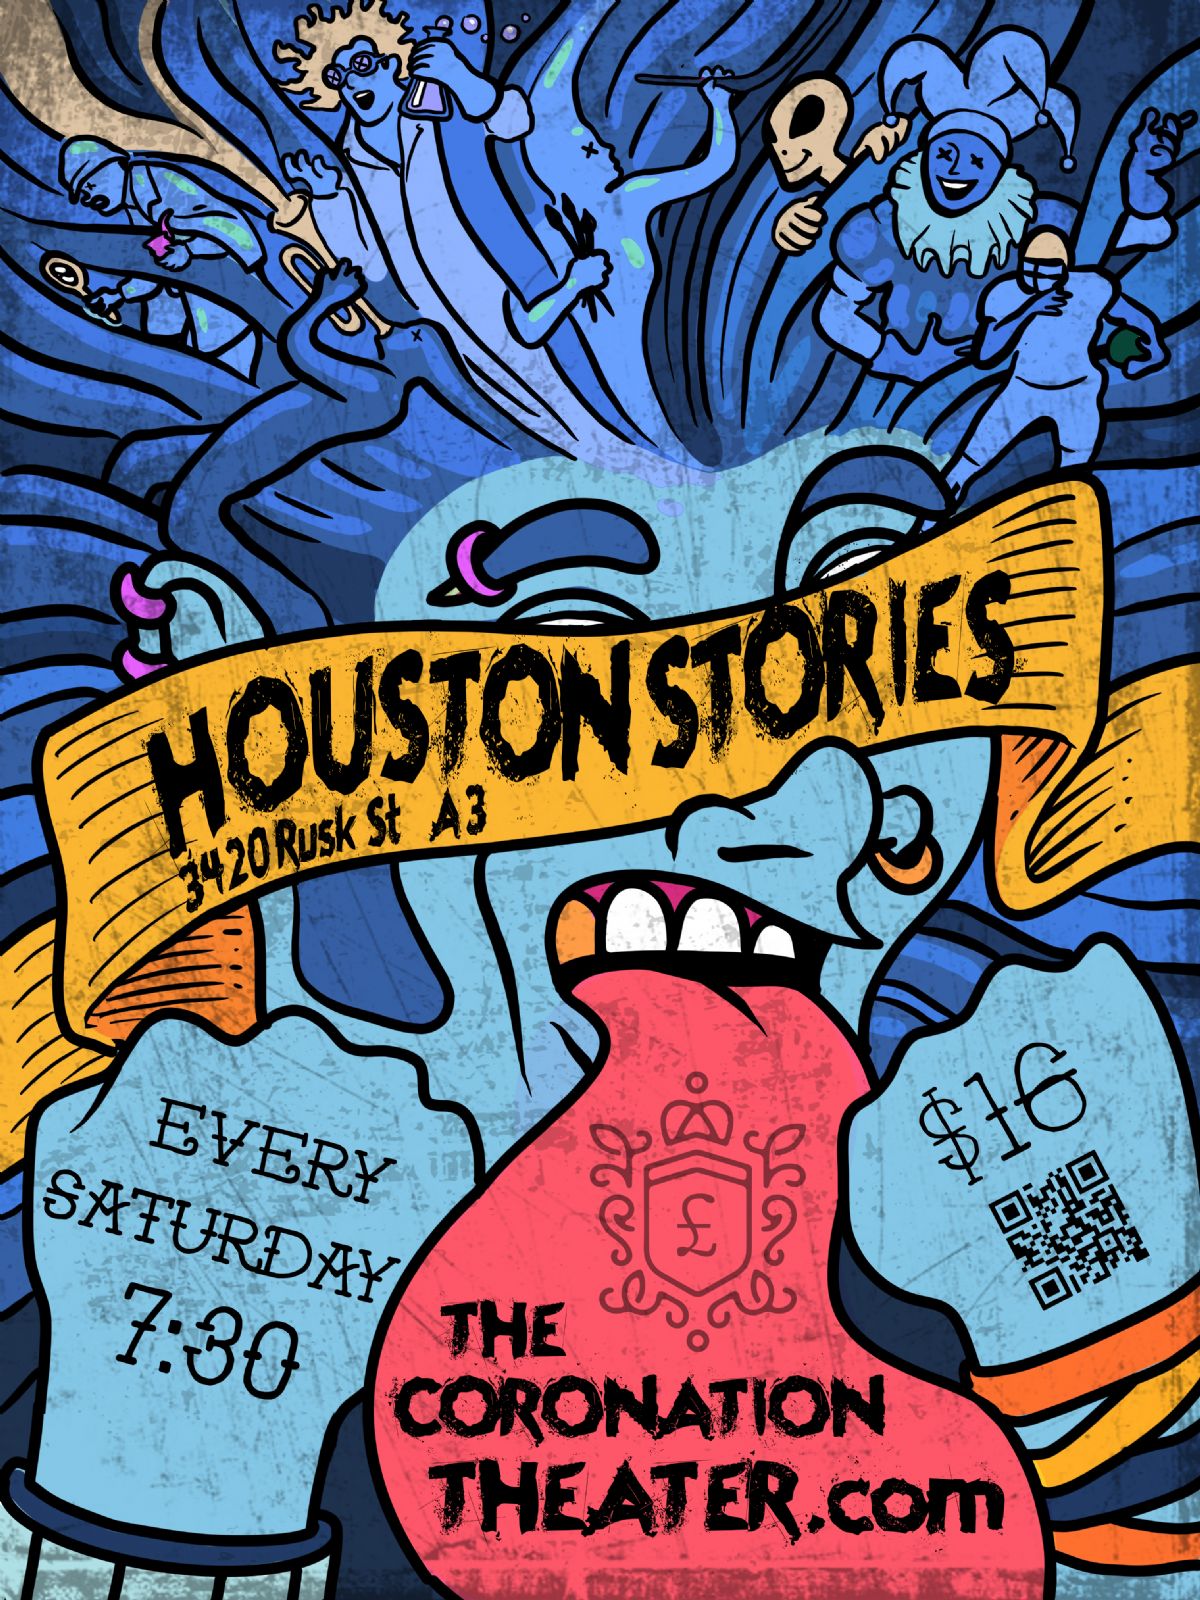 Houston Stories Event Poster